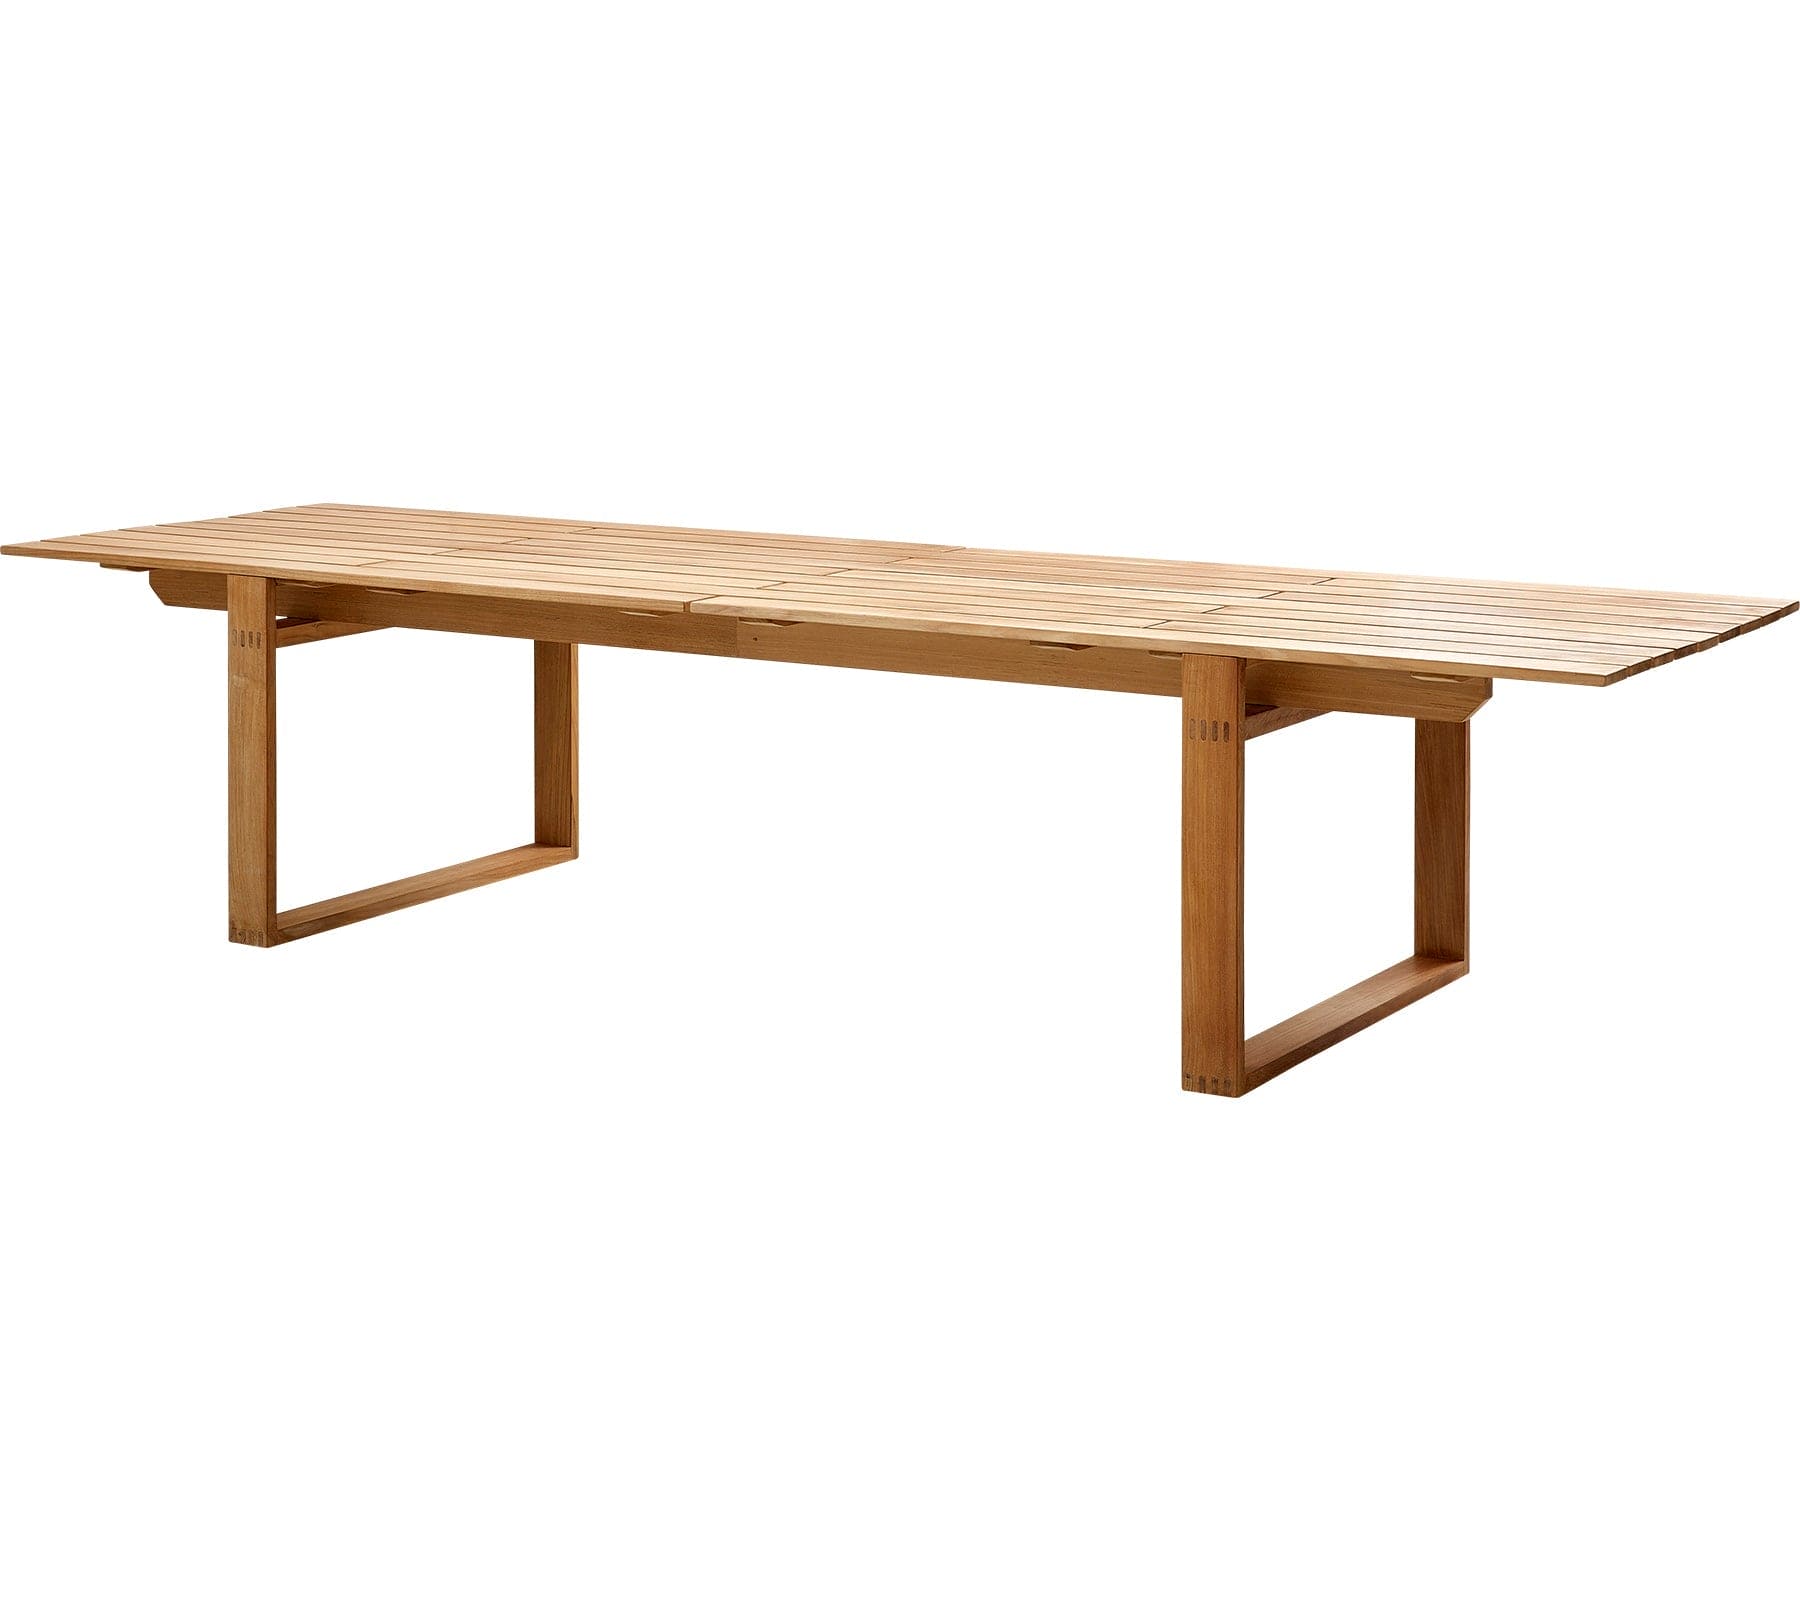 Boxhill's Endless Outdoor Rectangular Dining Table Large, front side view in white background